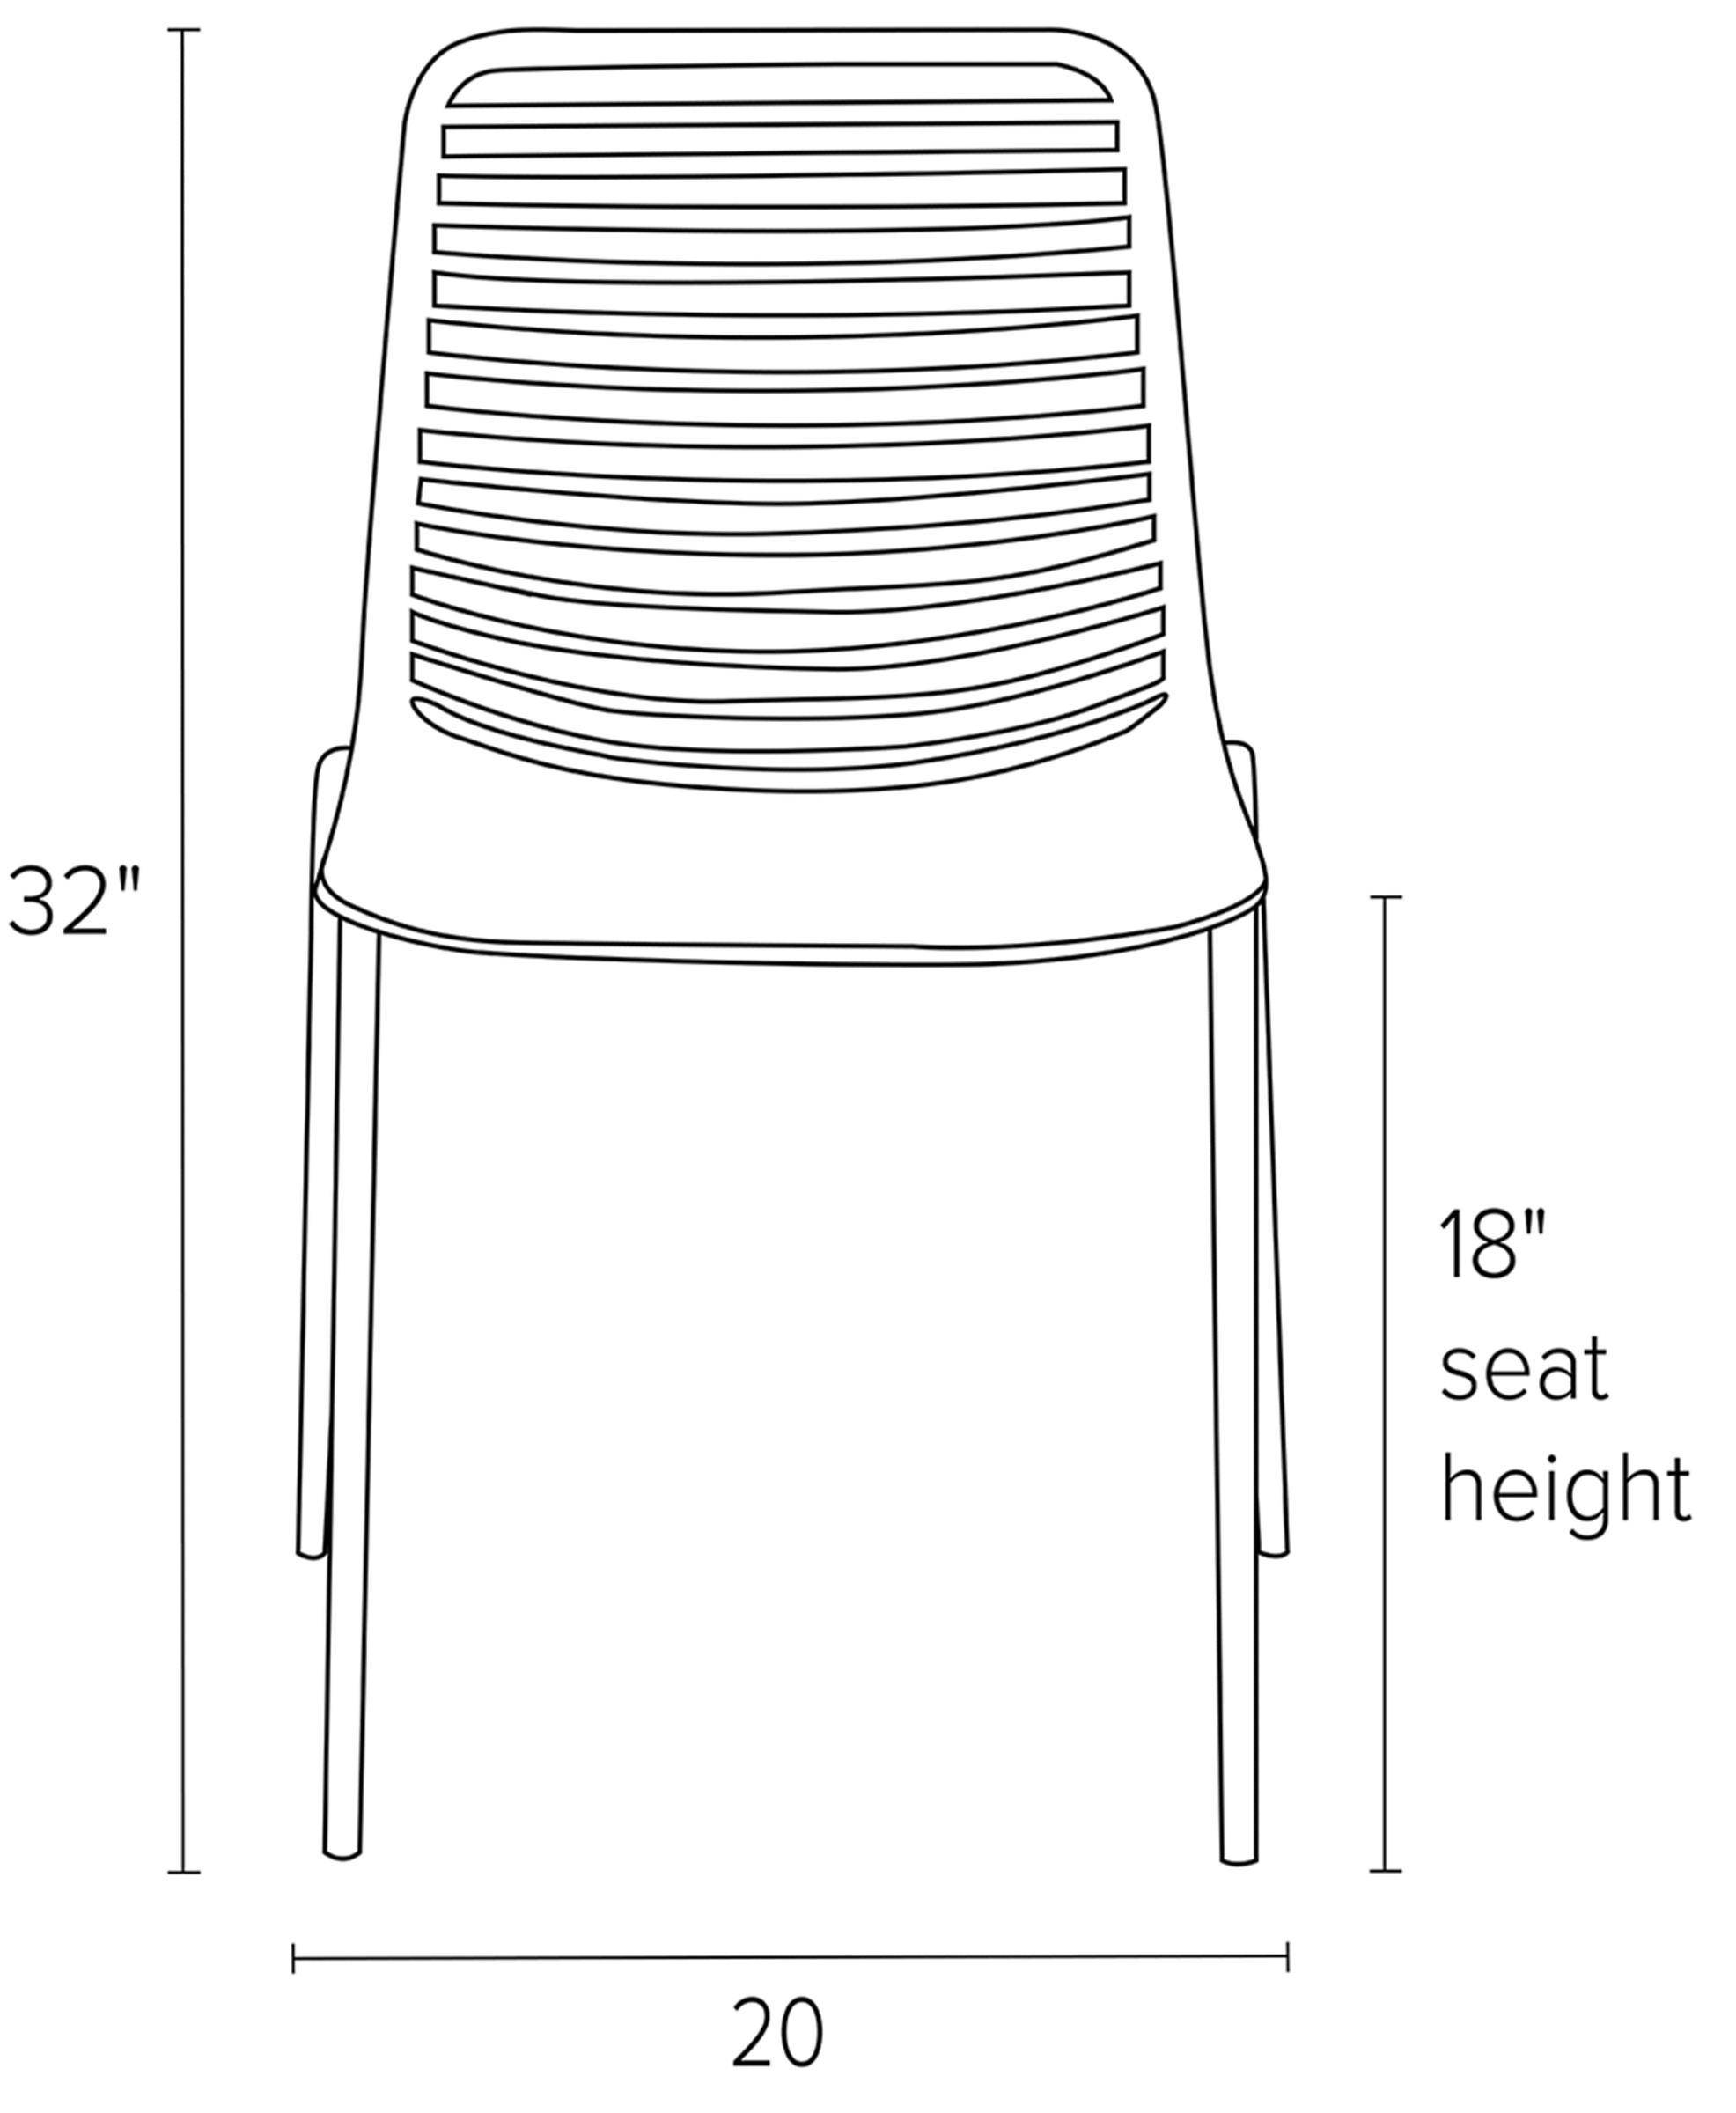 Front view dimension illustration of Mini side chair.